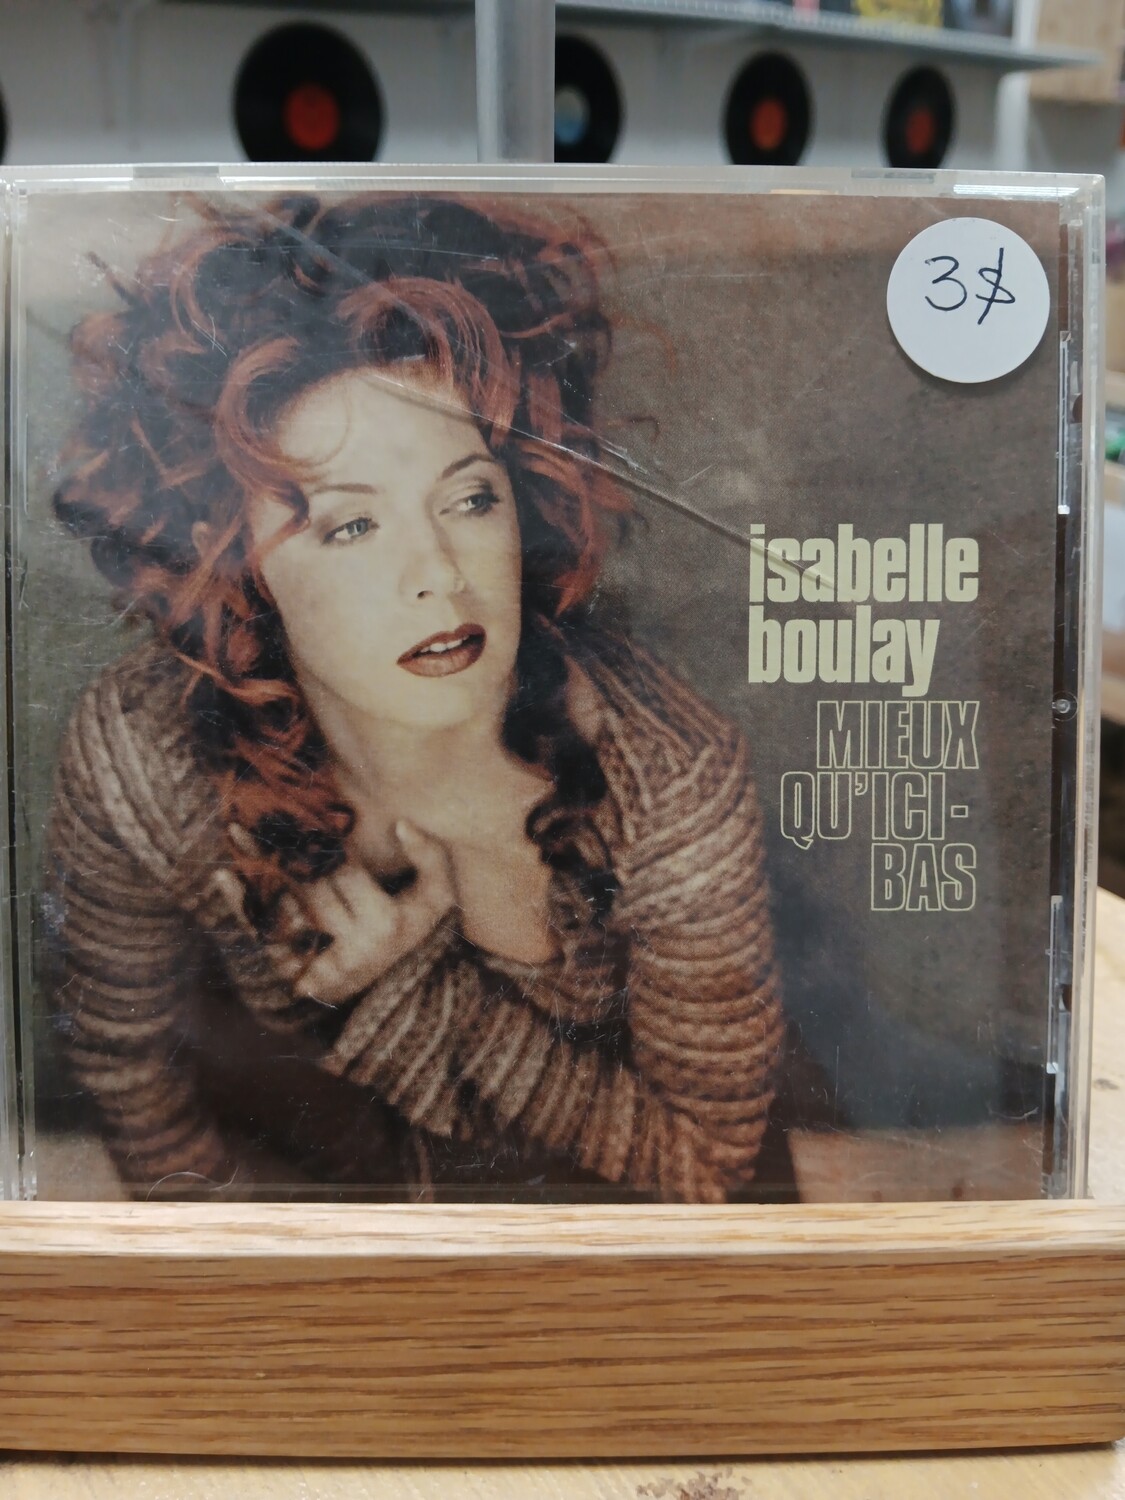 Isabelle Boulay - Mieux qu'ici bas (CD)